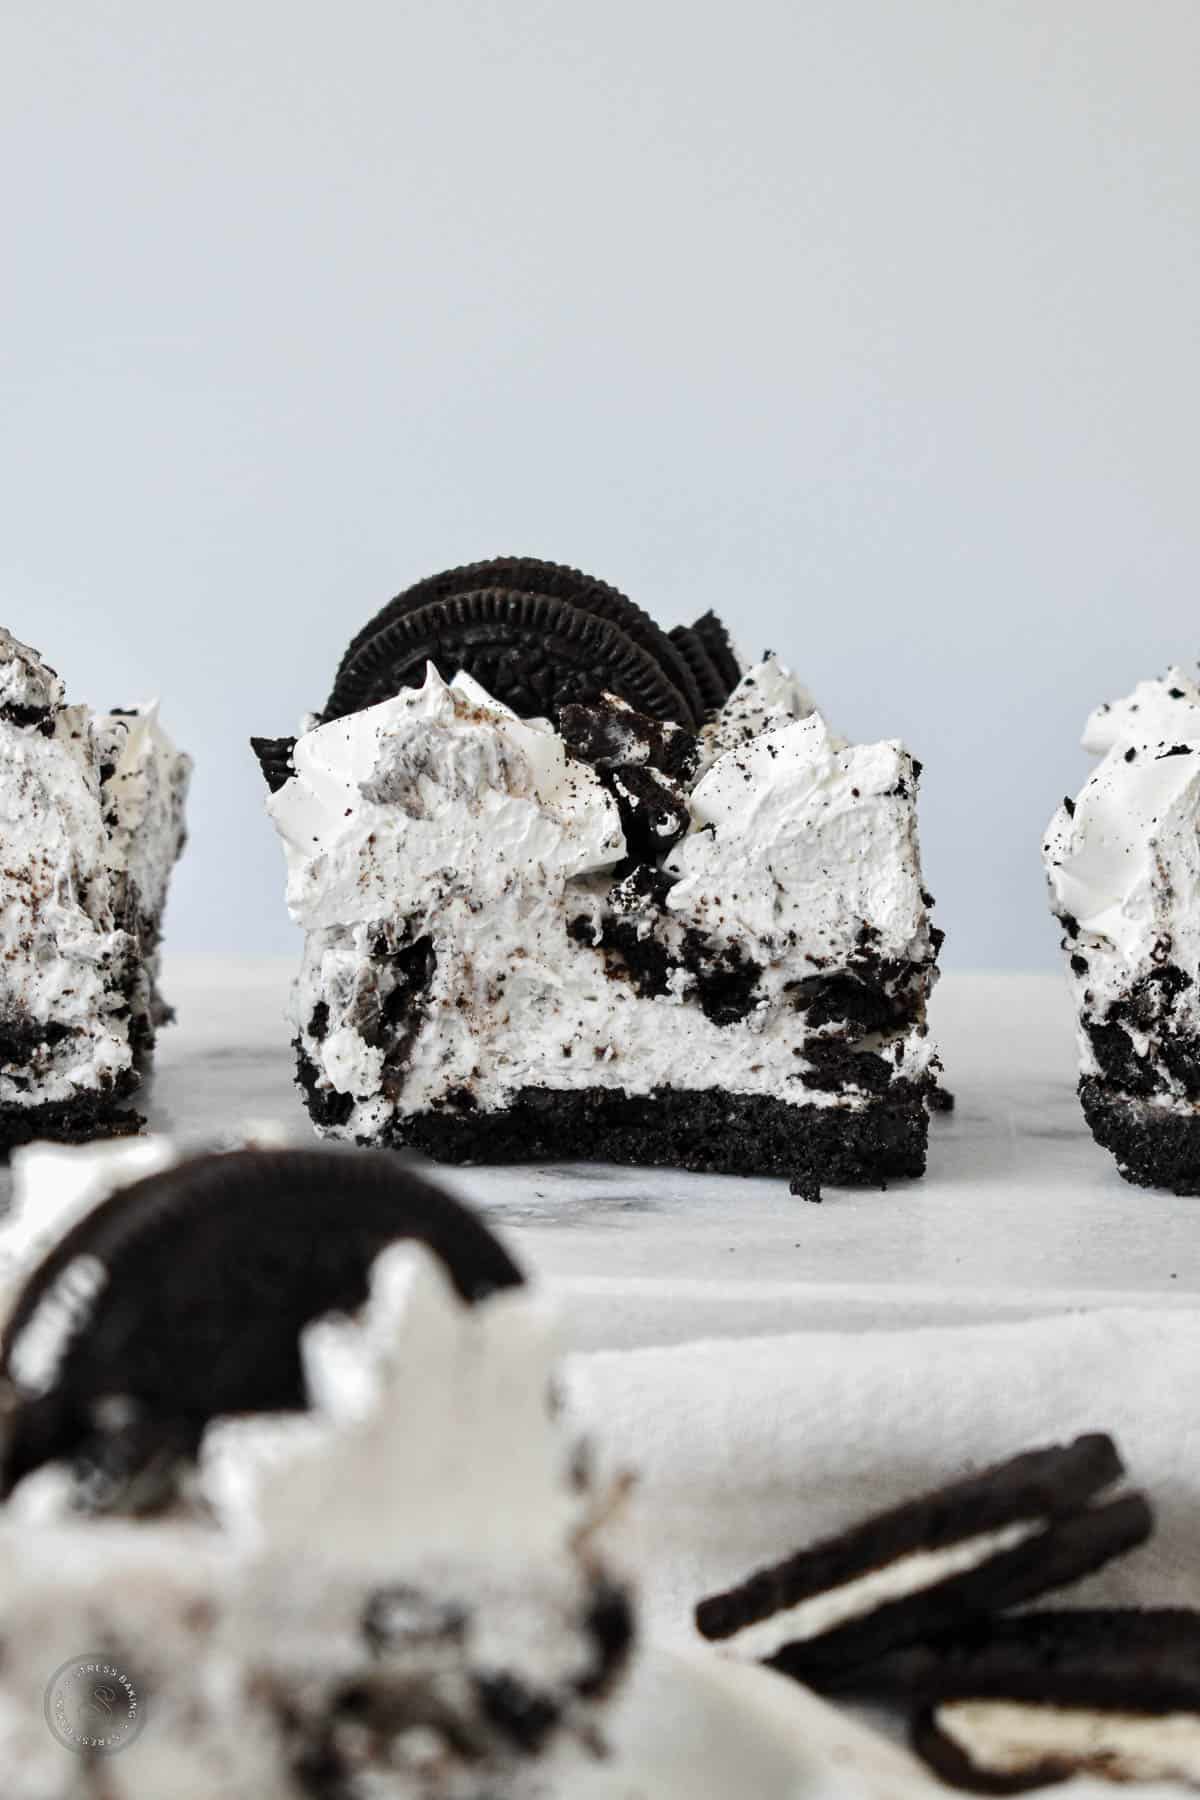 Slice of Oreo no bake dessert with an Oreo crust and black and white filling topped with whipped frosting and Oreo garnish